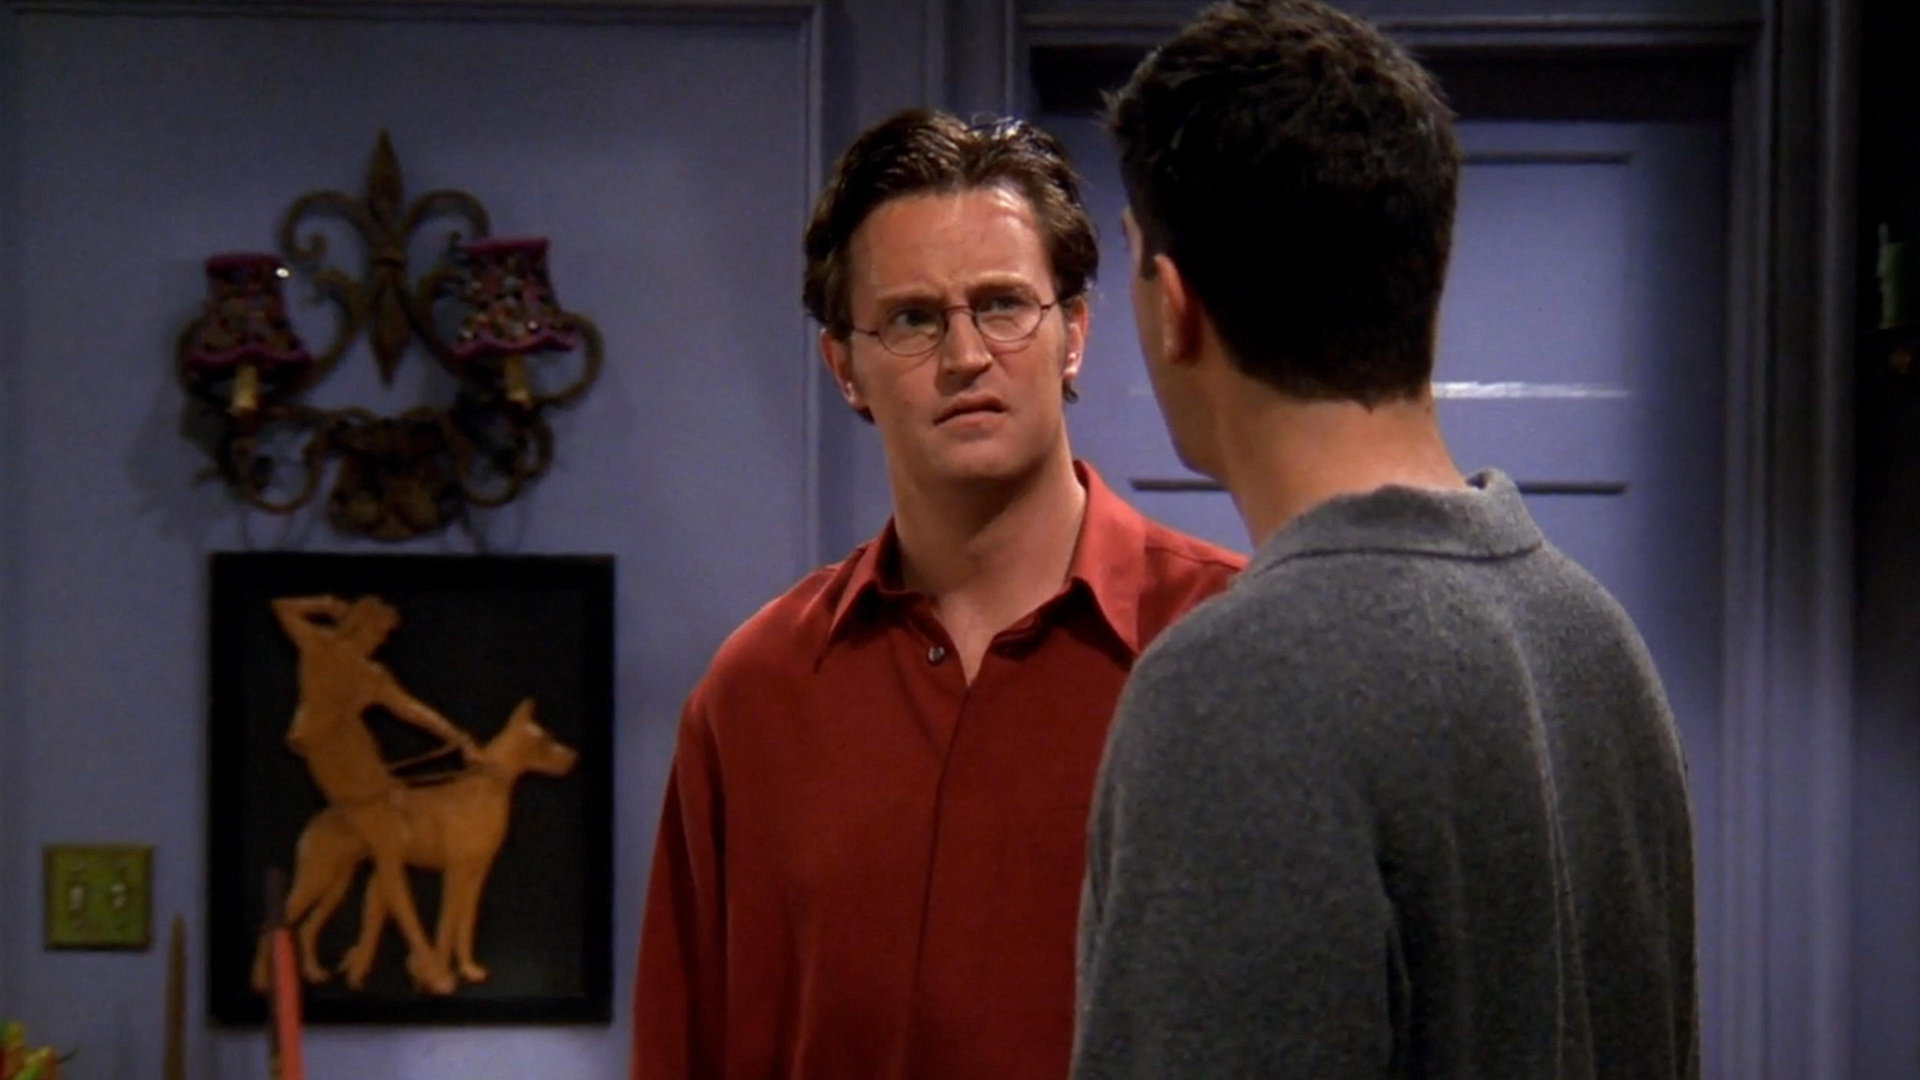 The One Where Chandler Doesn't Like Dogs